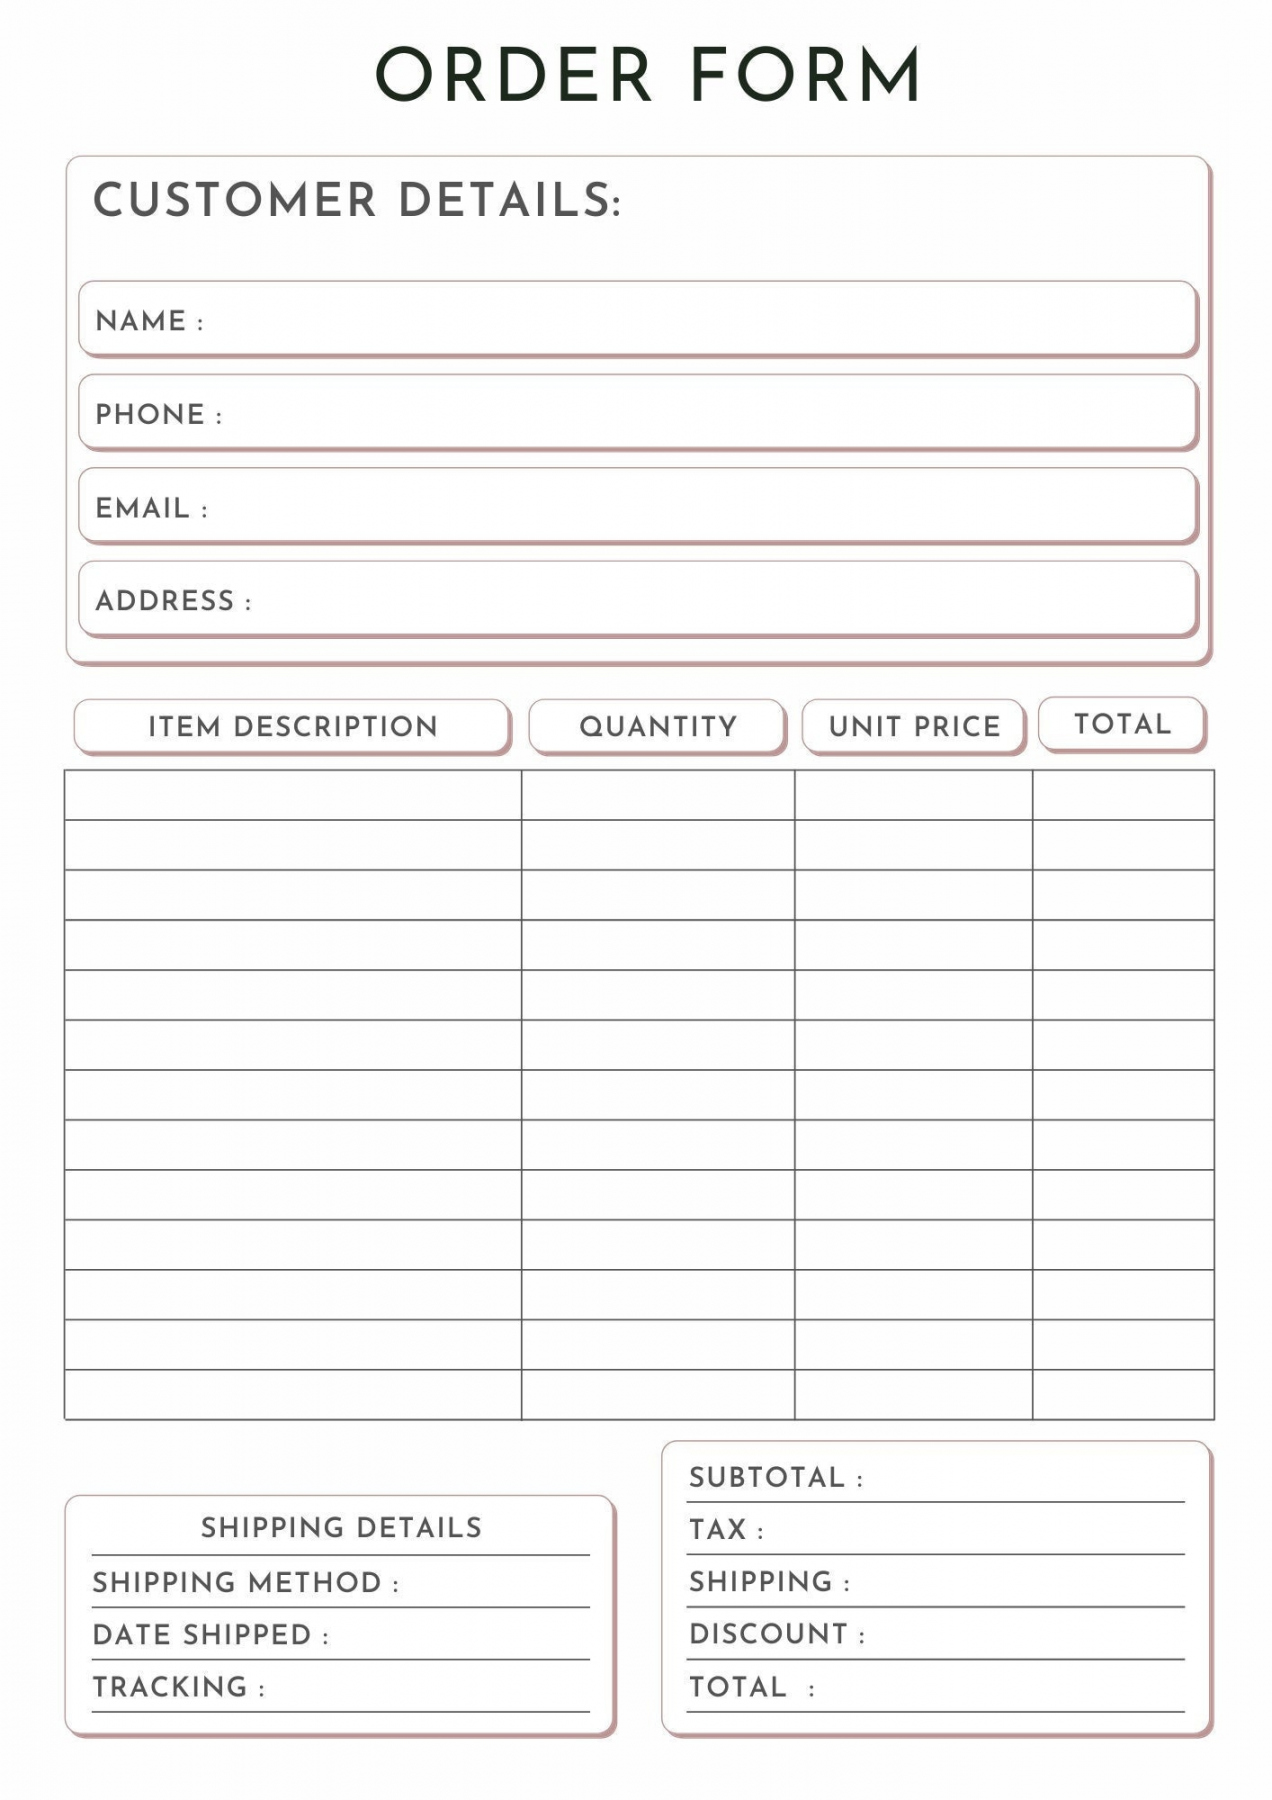 Small Business Order Form  Printable Digital Download  Simple, Easy To  Use Order Form  Order Tracker  Tracker for Orders  Custom - FREE Printables - Small Business Free Printable Order Forms